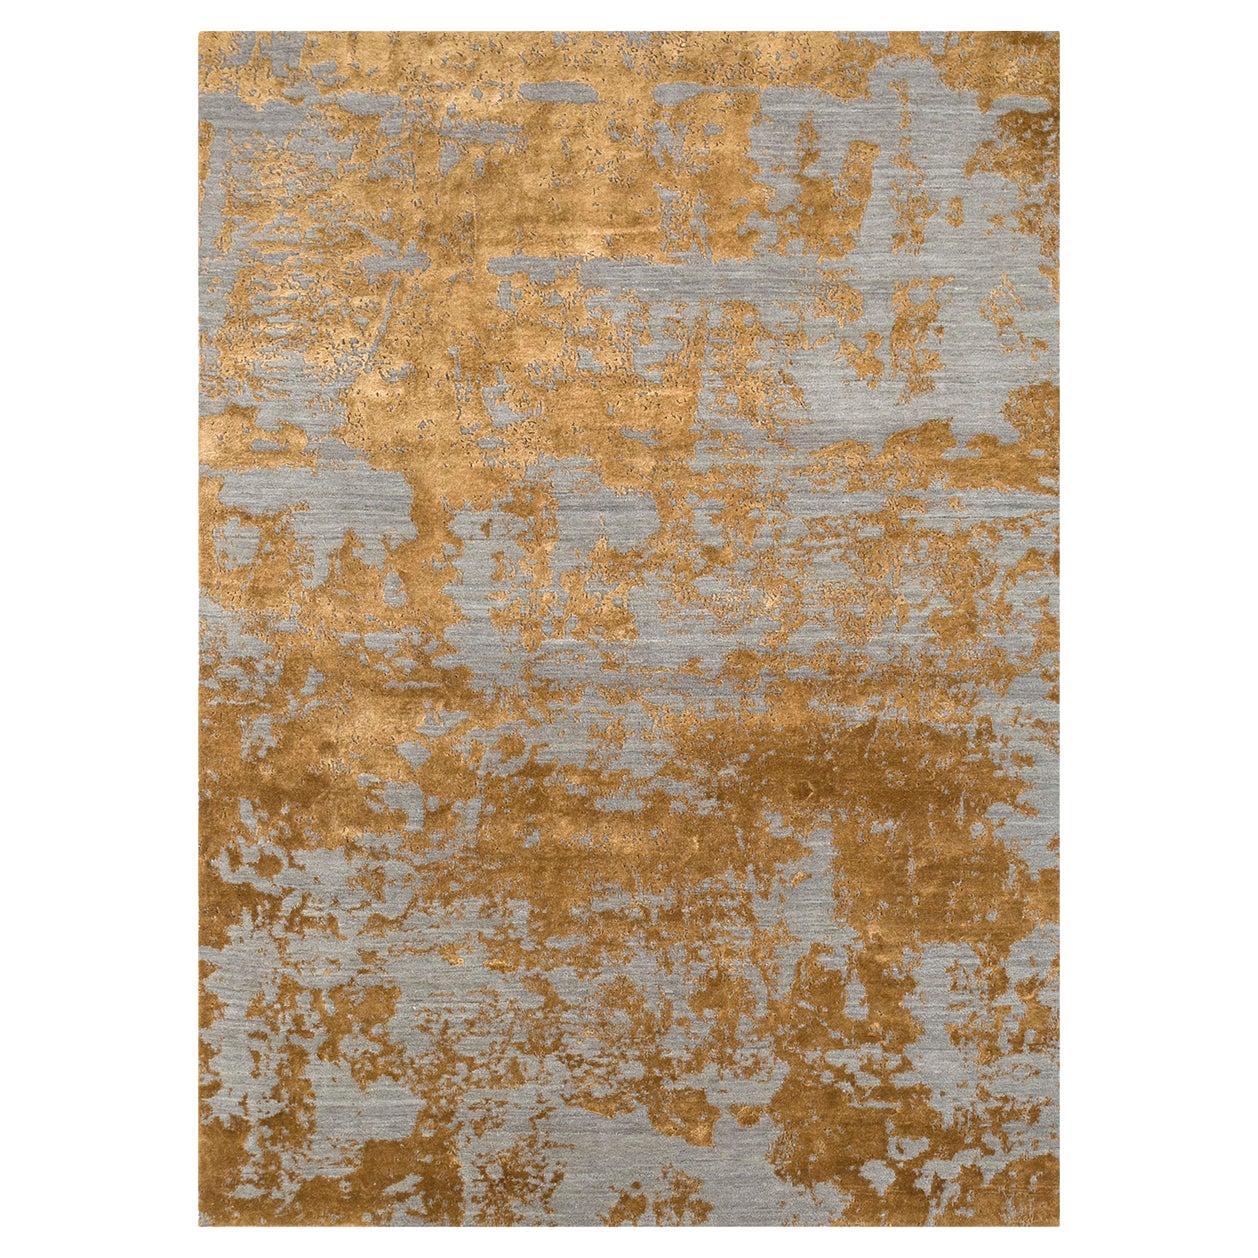 Flake Rug by Rural Weavers, Knotted, Wool, Bamboo Silk, 270x360cm